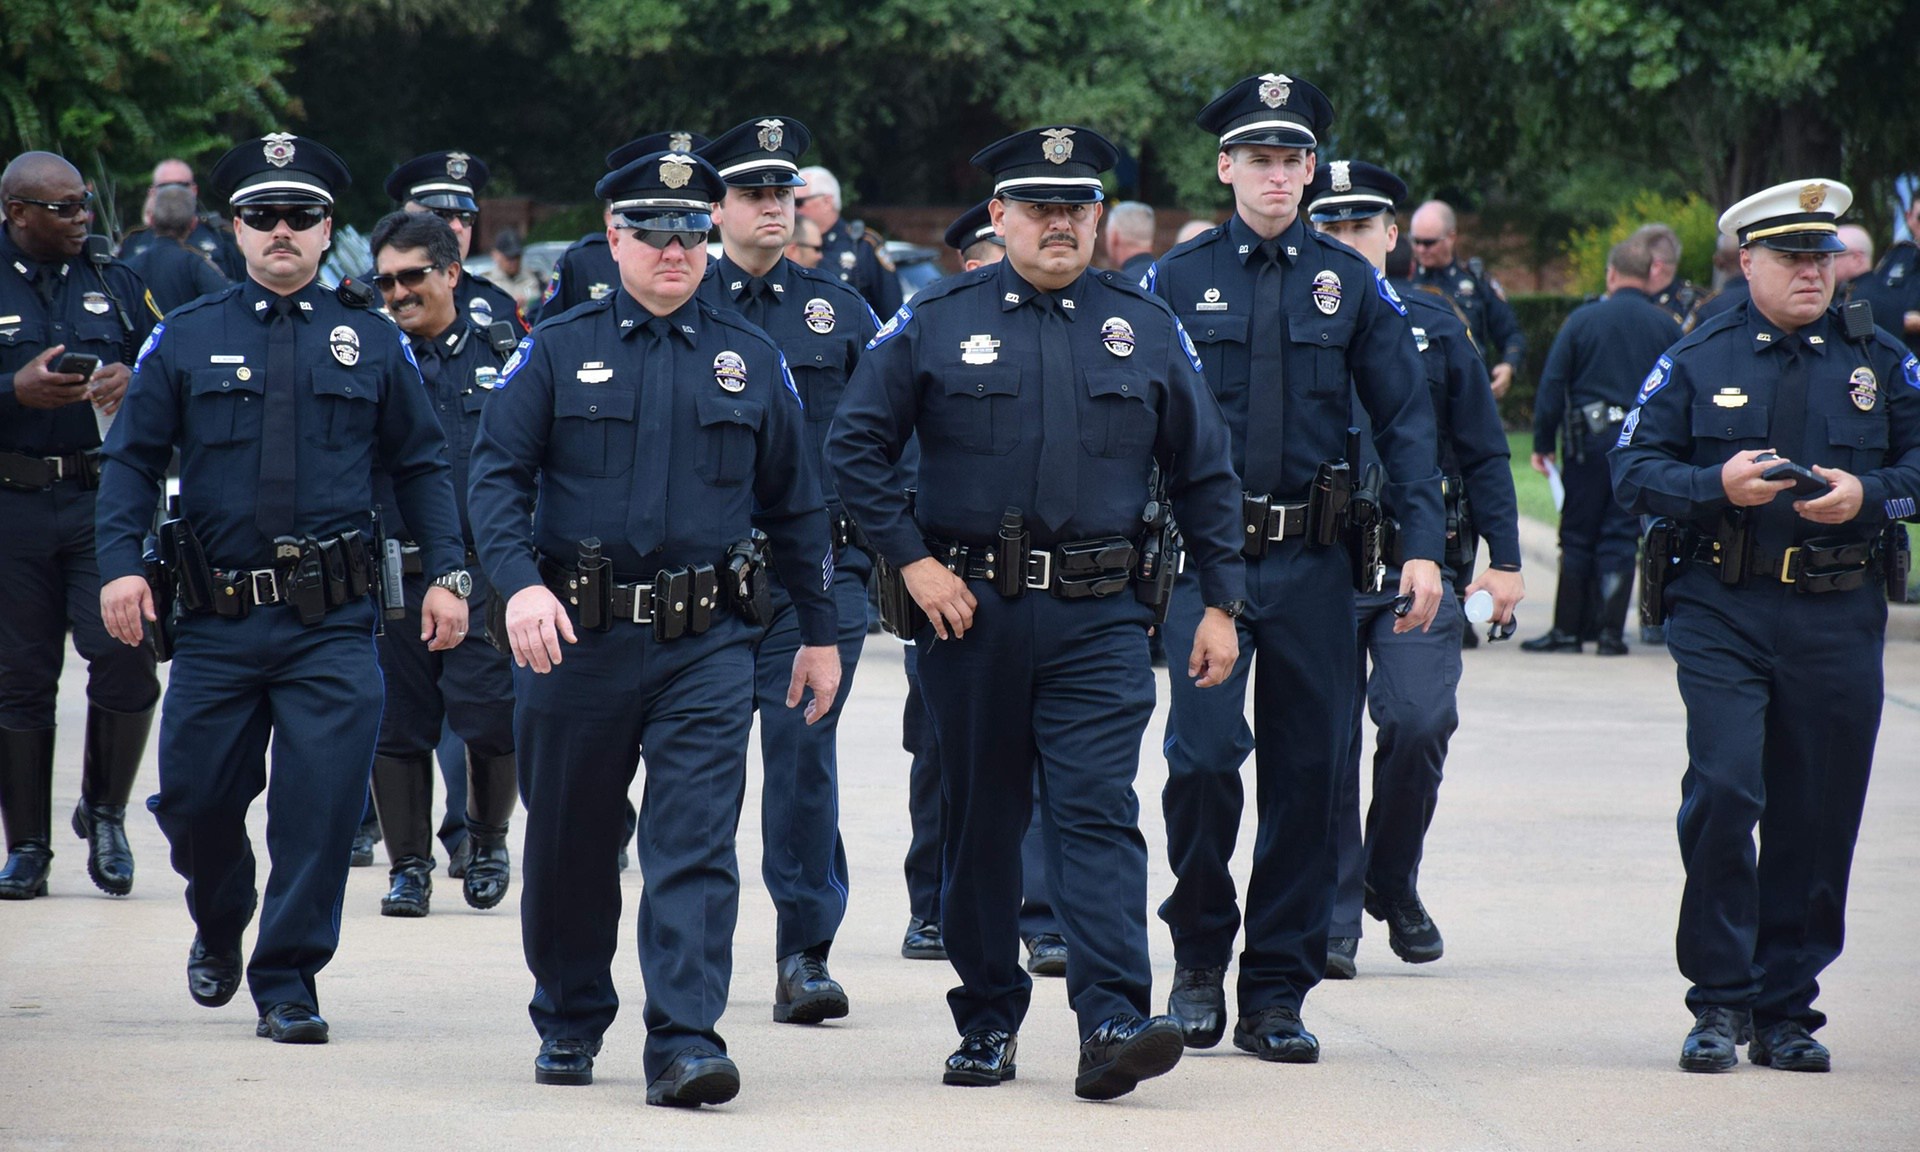 Image of police officers